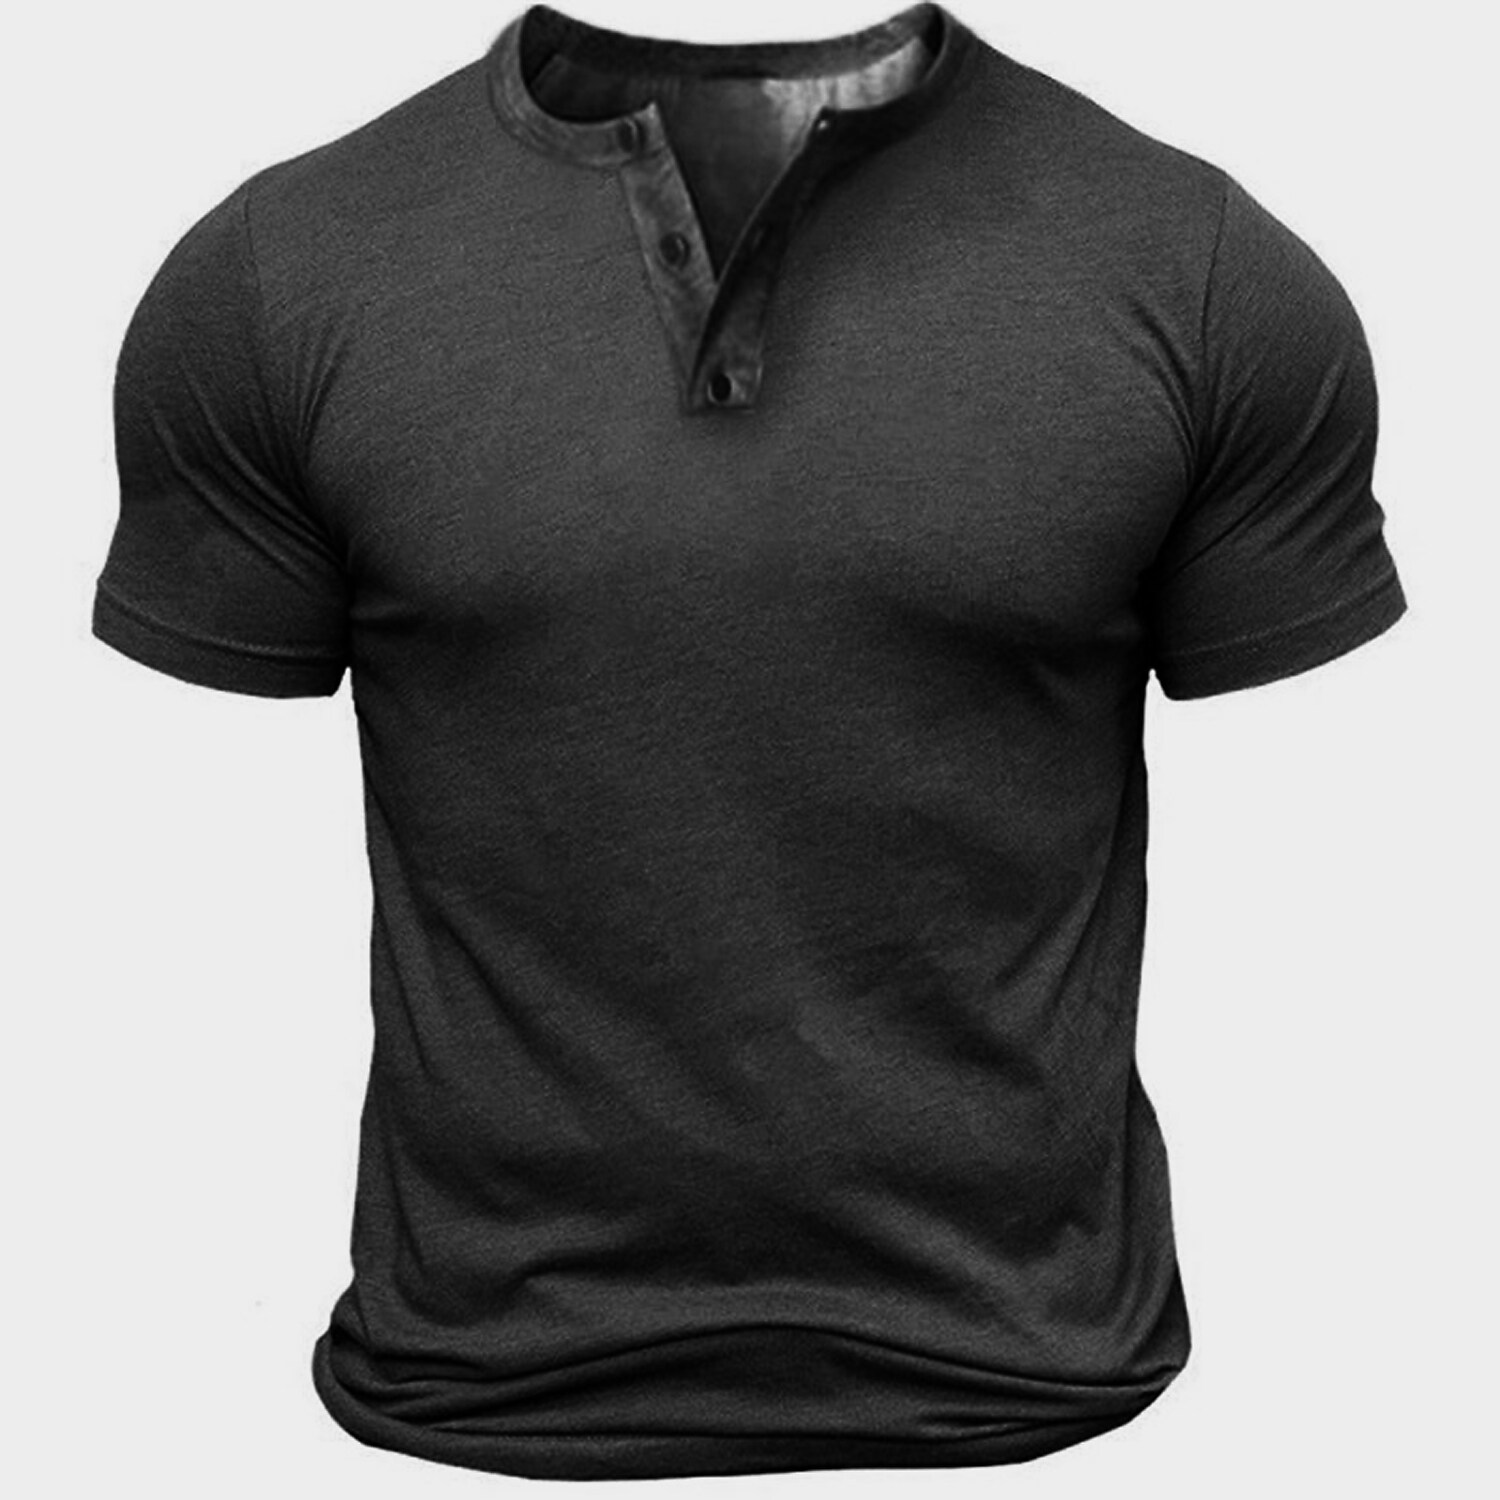 Men's T shirt Tee Henley Shirt Tee Solid Color Outdoor Daily Short Sleeve Button-Down 